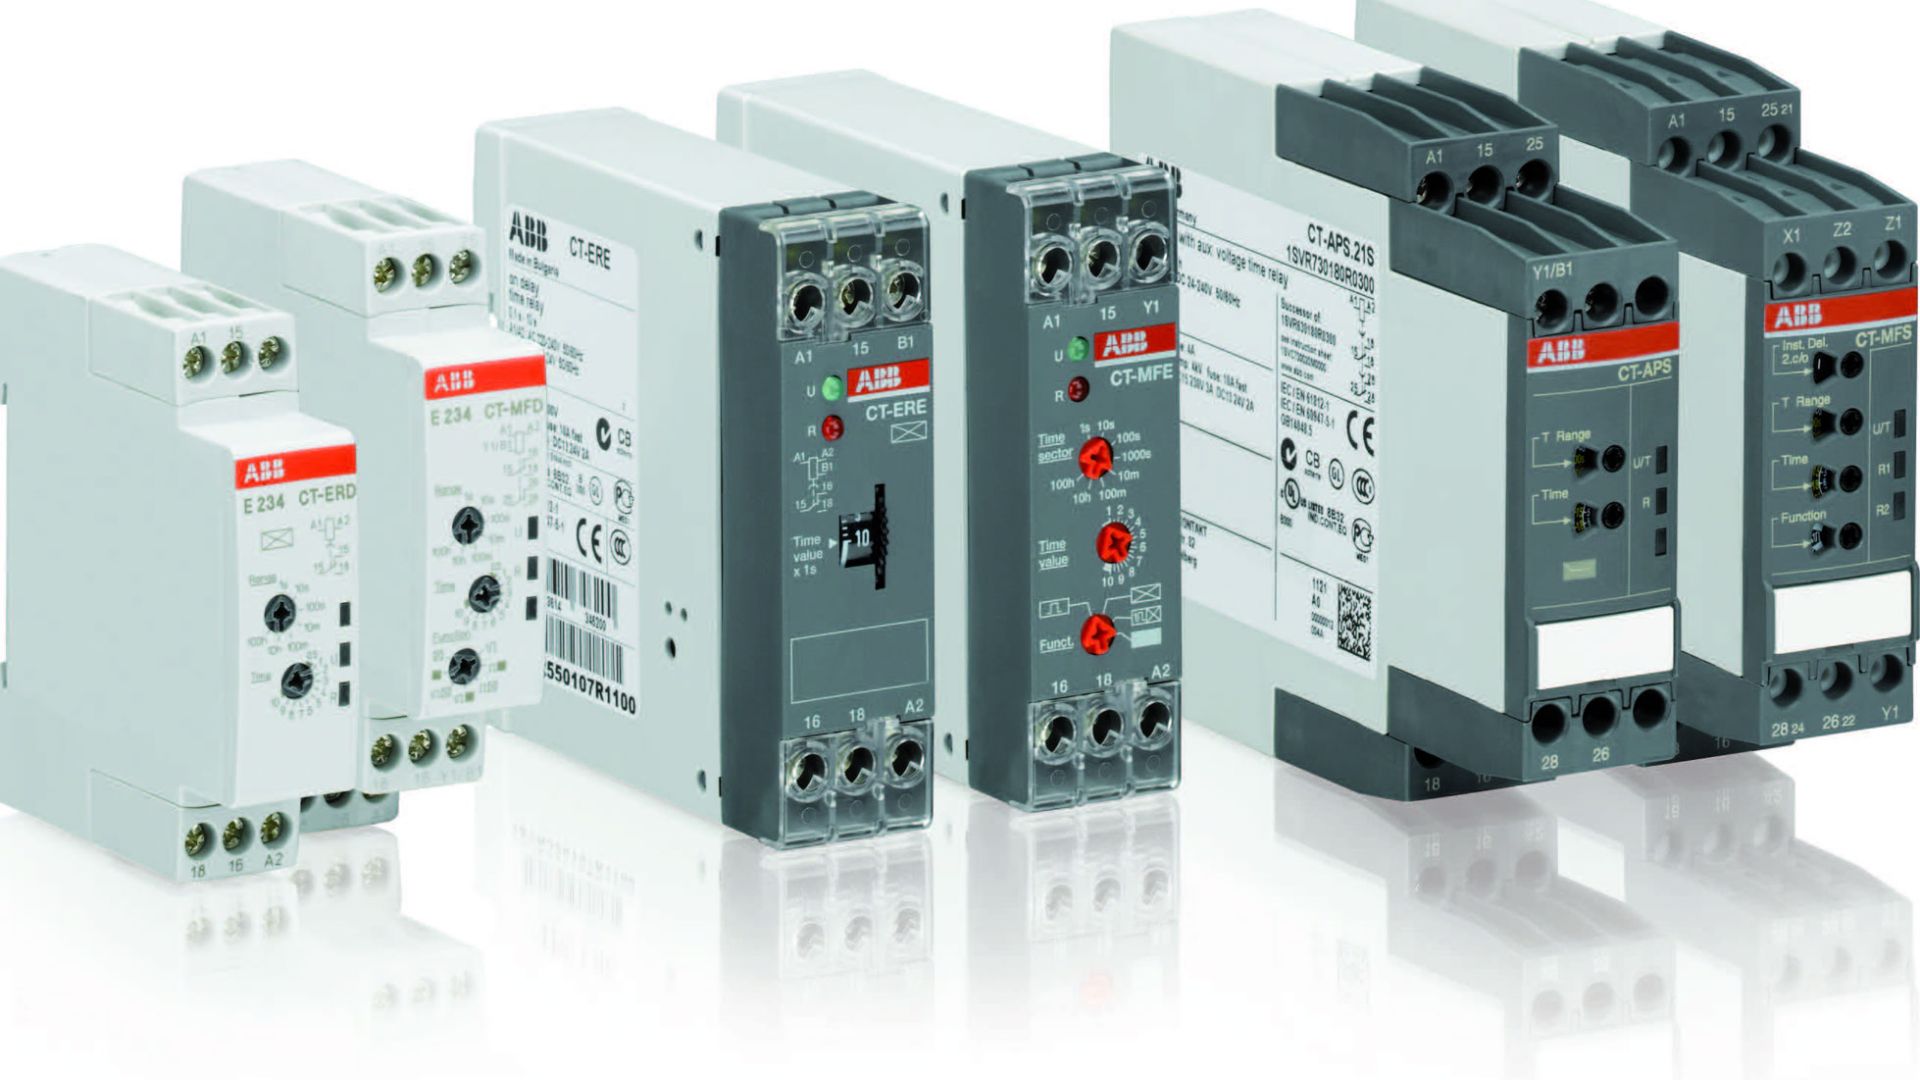 How ABB Elеctrical Products Can Hеlp Among Divеrsе Products